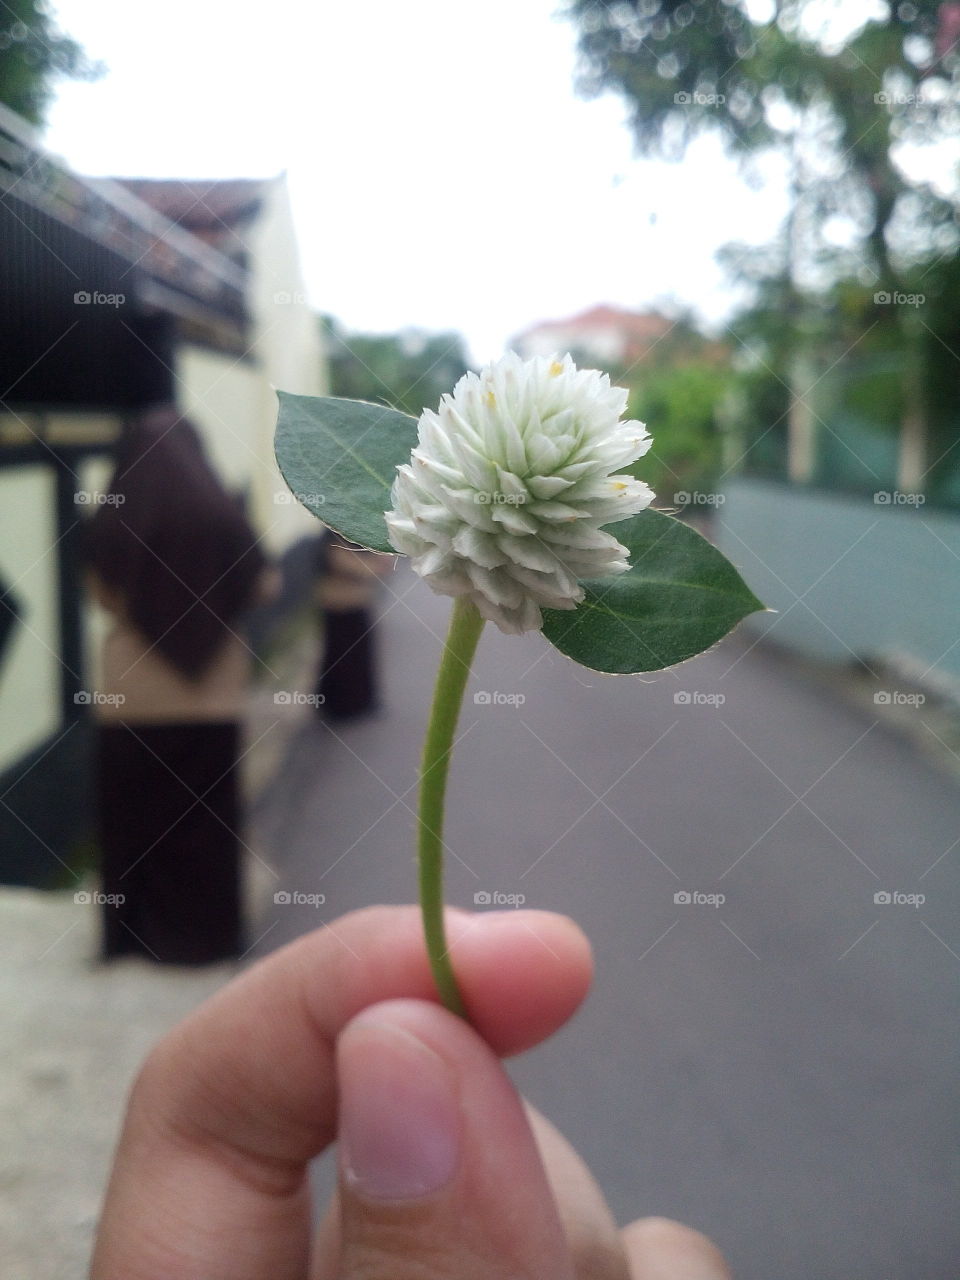 Flower and its leaf